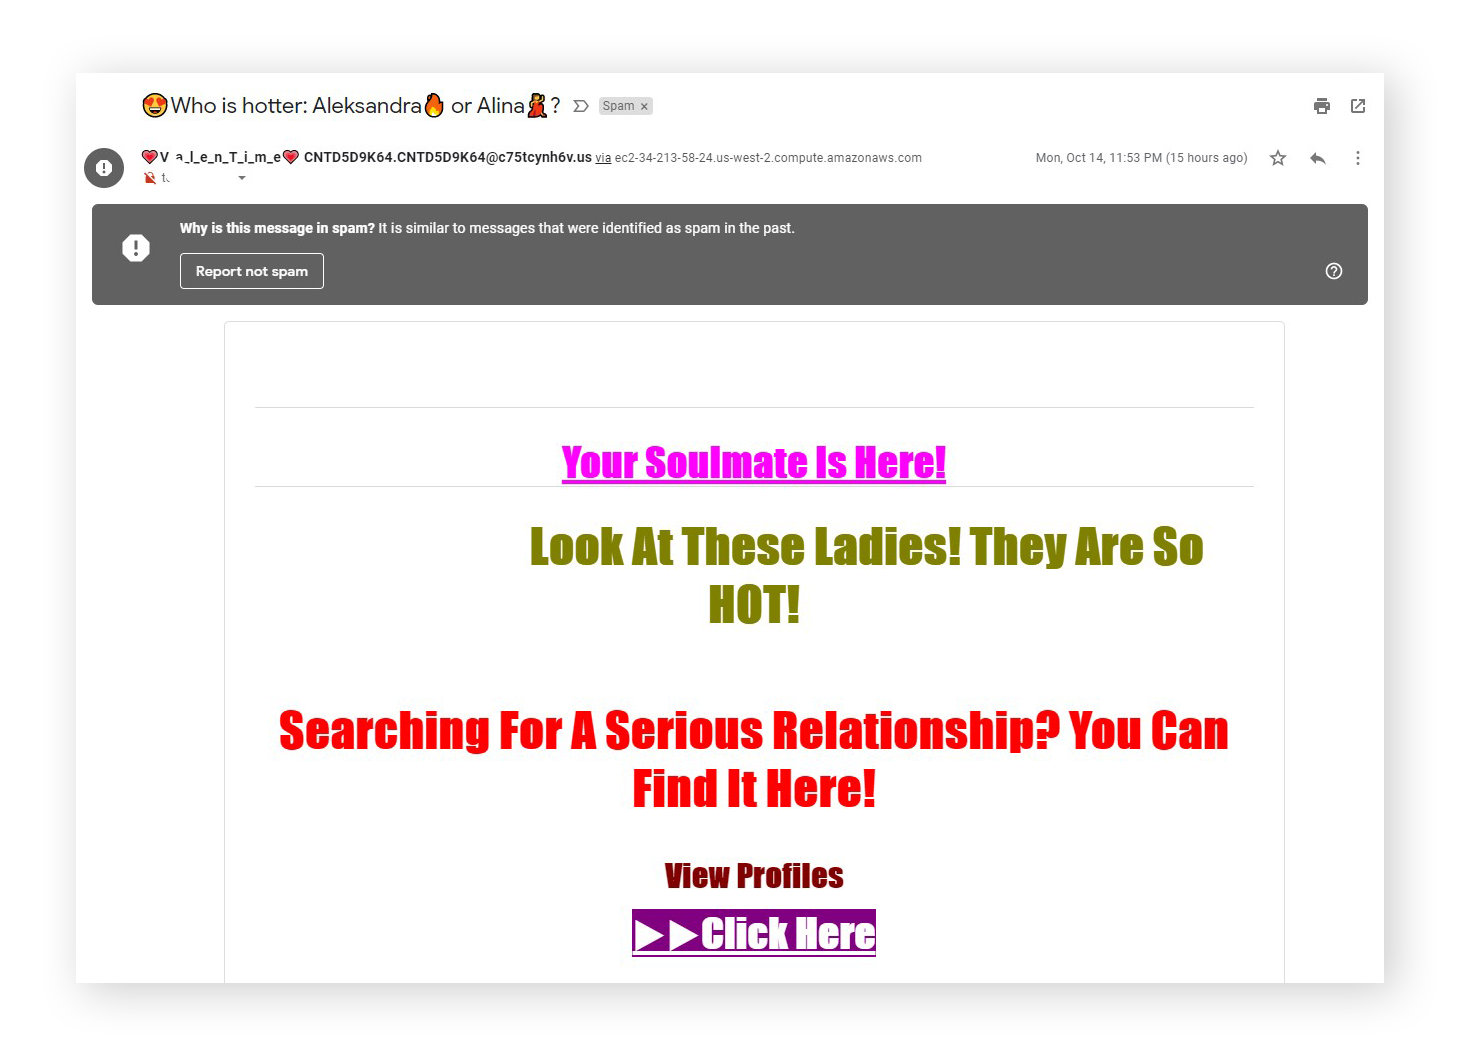 Example of a spam email promoting an online dating service